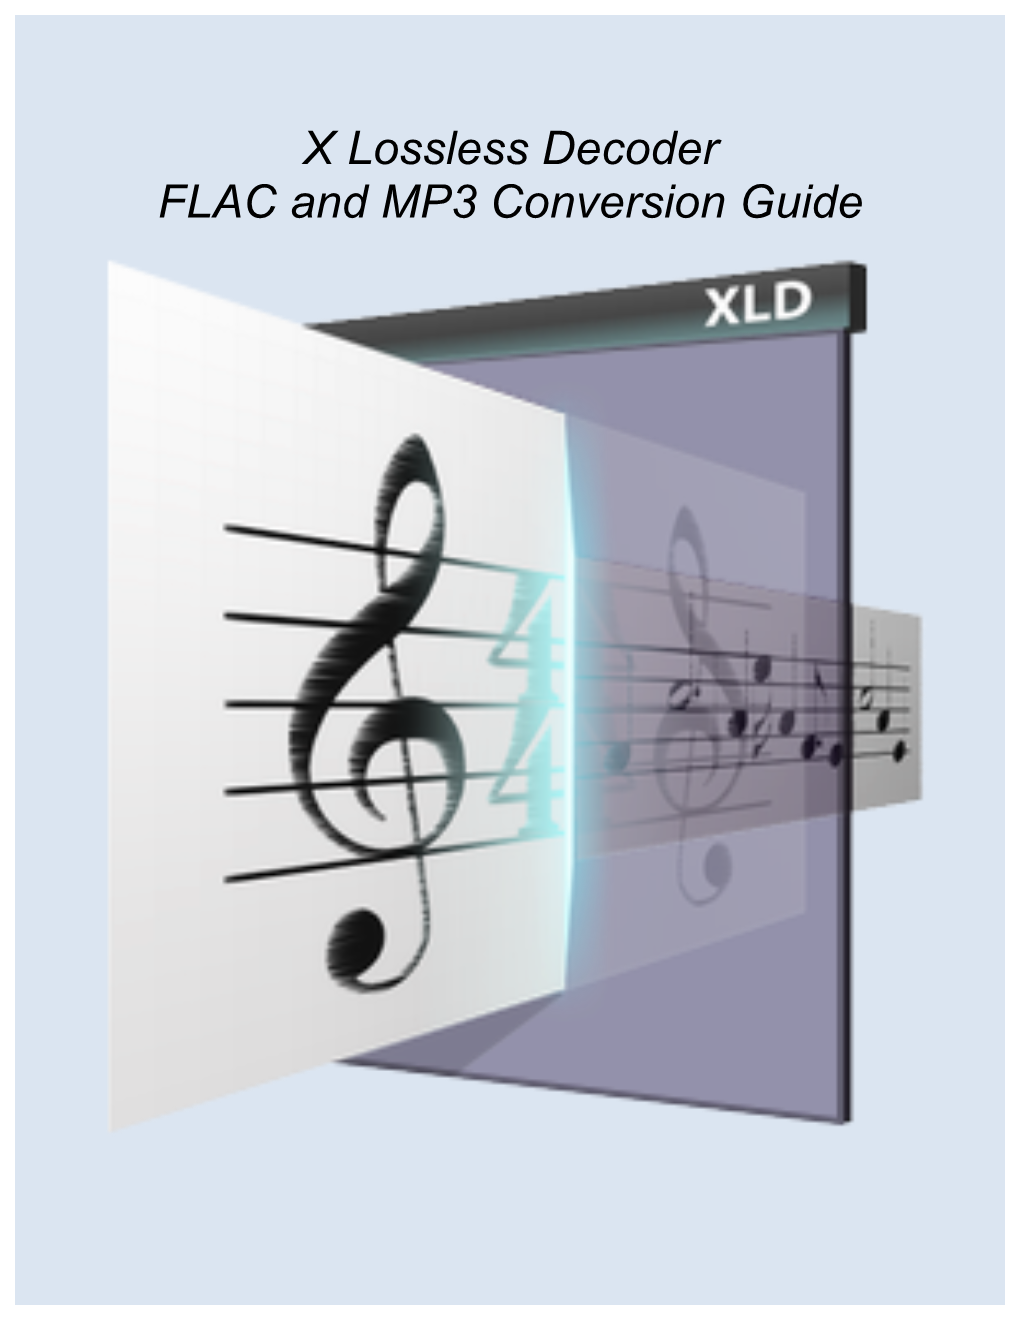 X Lossless Decoder FLAC and MP3 Conversion Guide